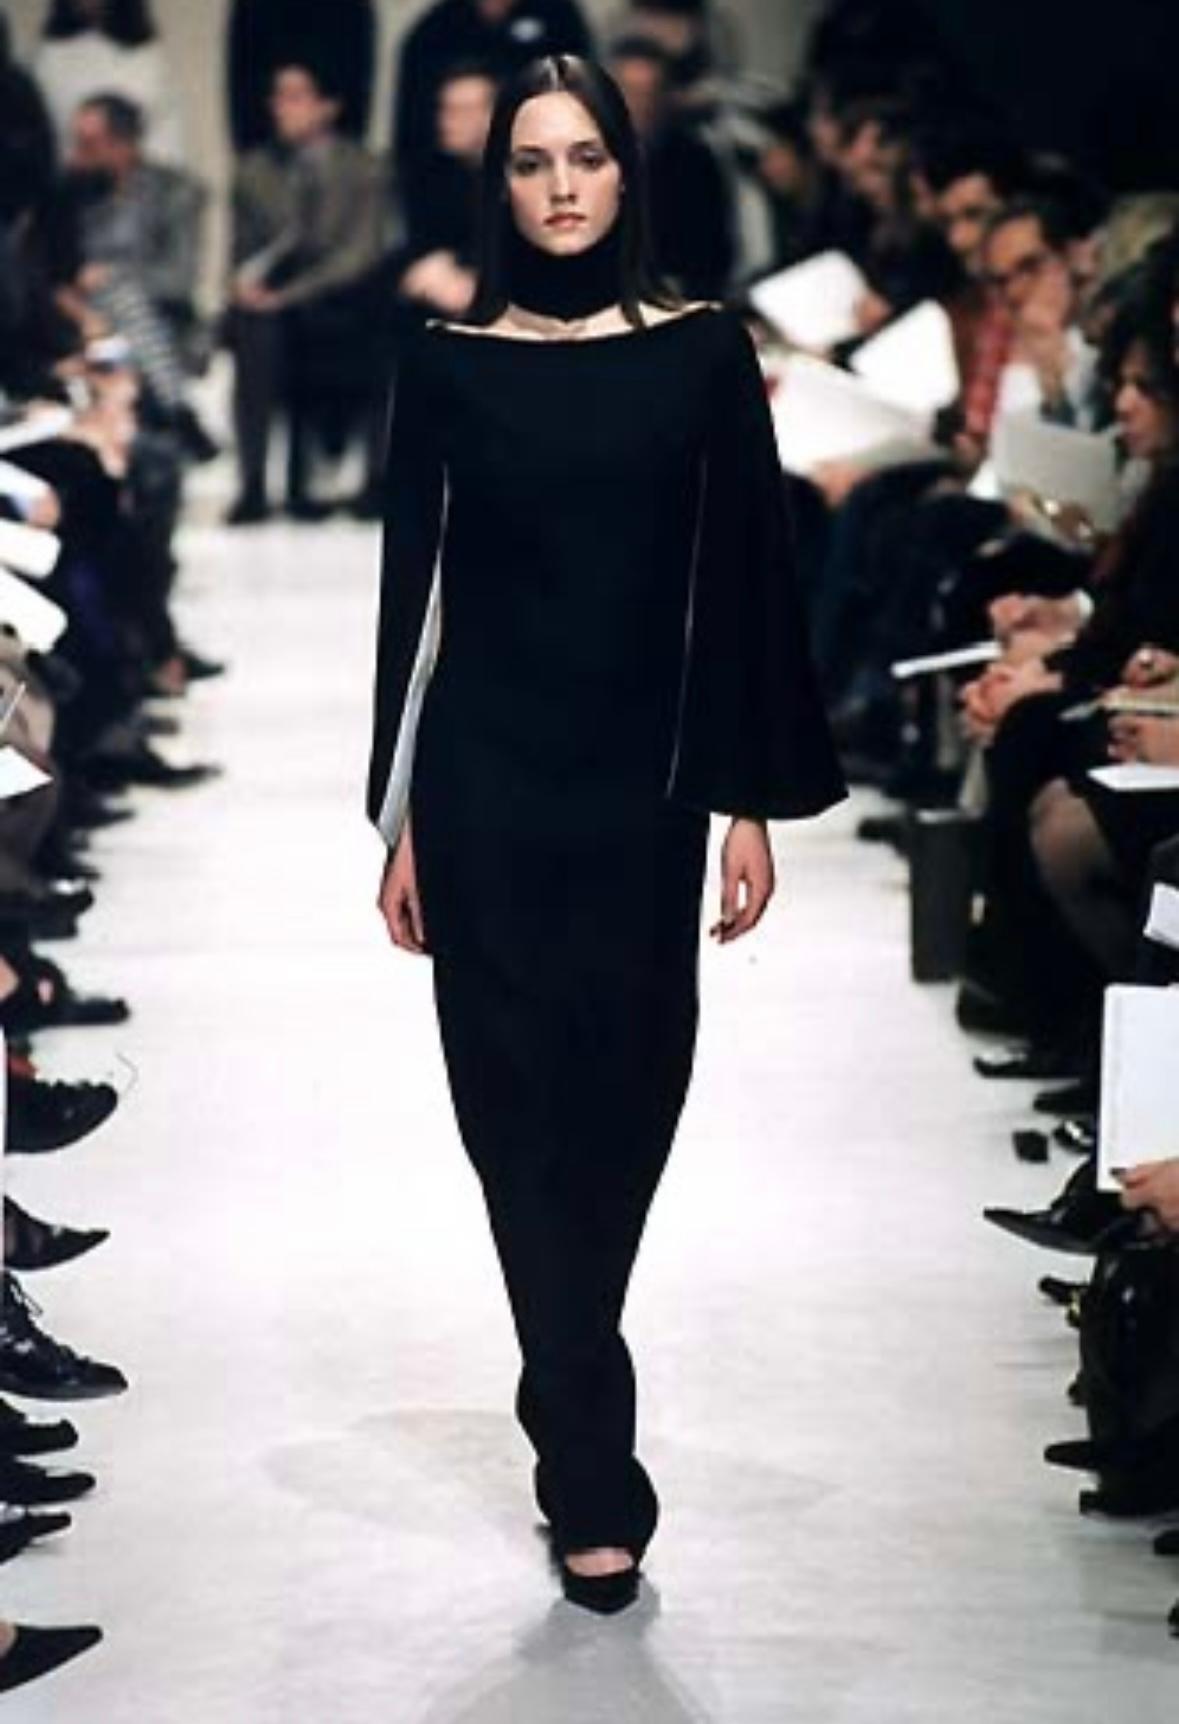 From Nicolas Ghesquière's Fall/Winter 1998 collection at Balenciaga, this black linen capelet dress debuted on the season's runway. Constructed of lightweight sheer linen, this runway gown draws inspiration from Cristobal Balenziaga's designs in the